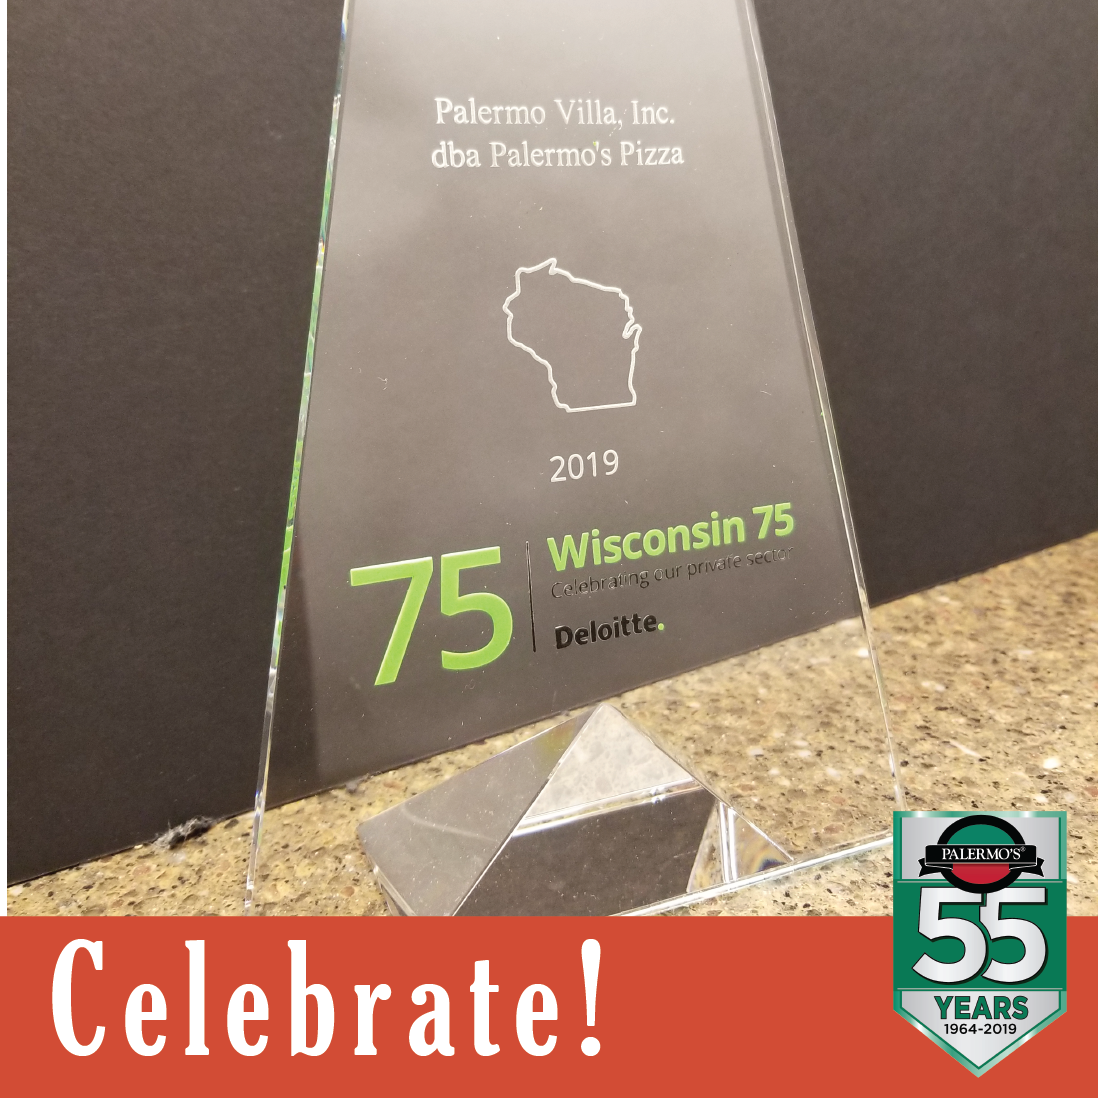 Proud to Be in Wisconsin’s Top 75 Again